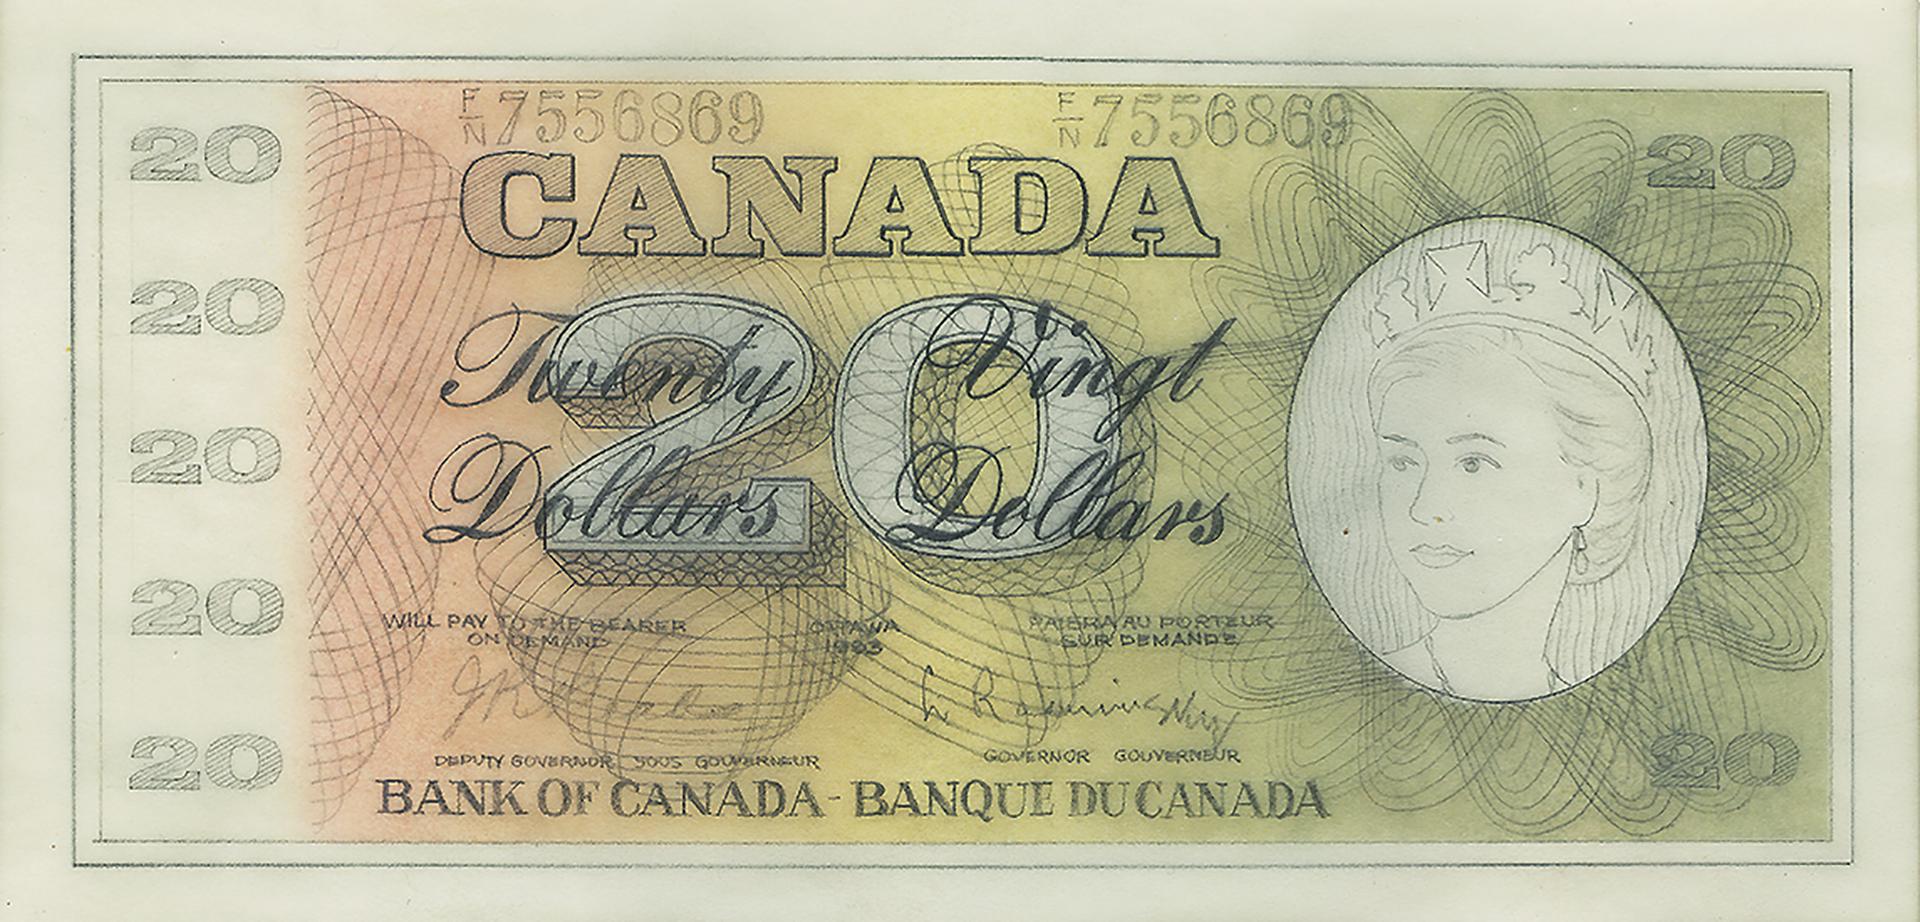 Bank notes, hand drawn models, 10 different designs in a slideshow format.